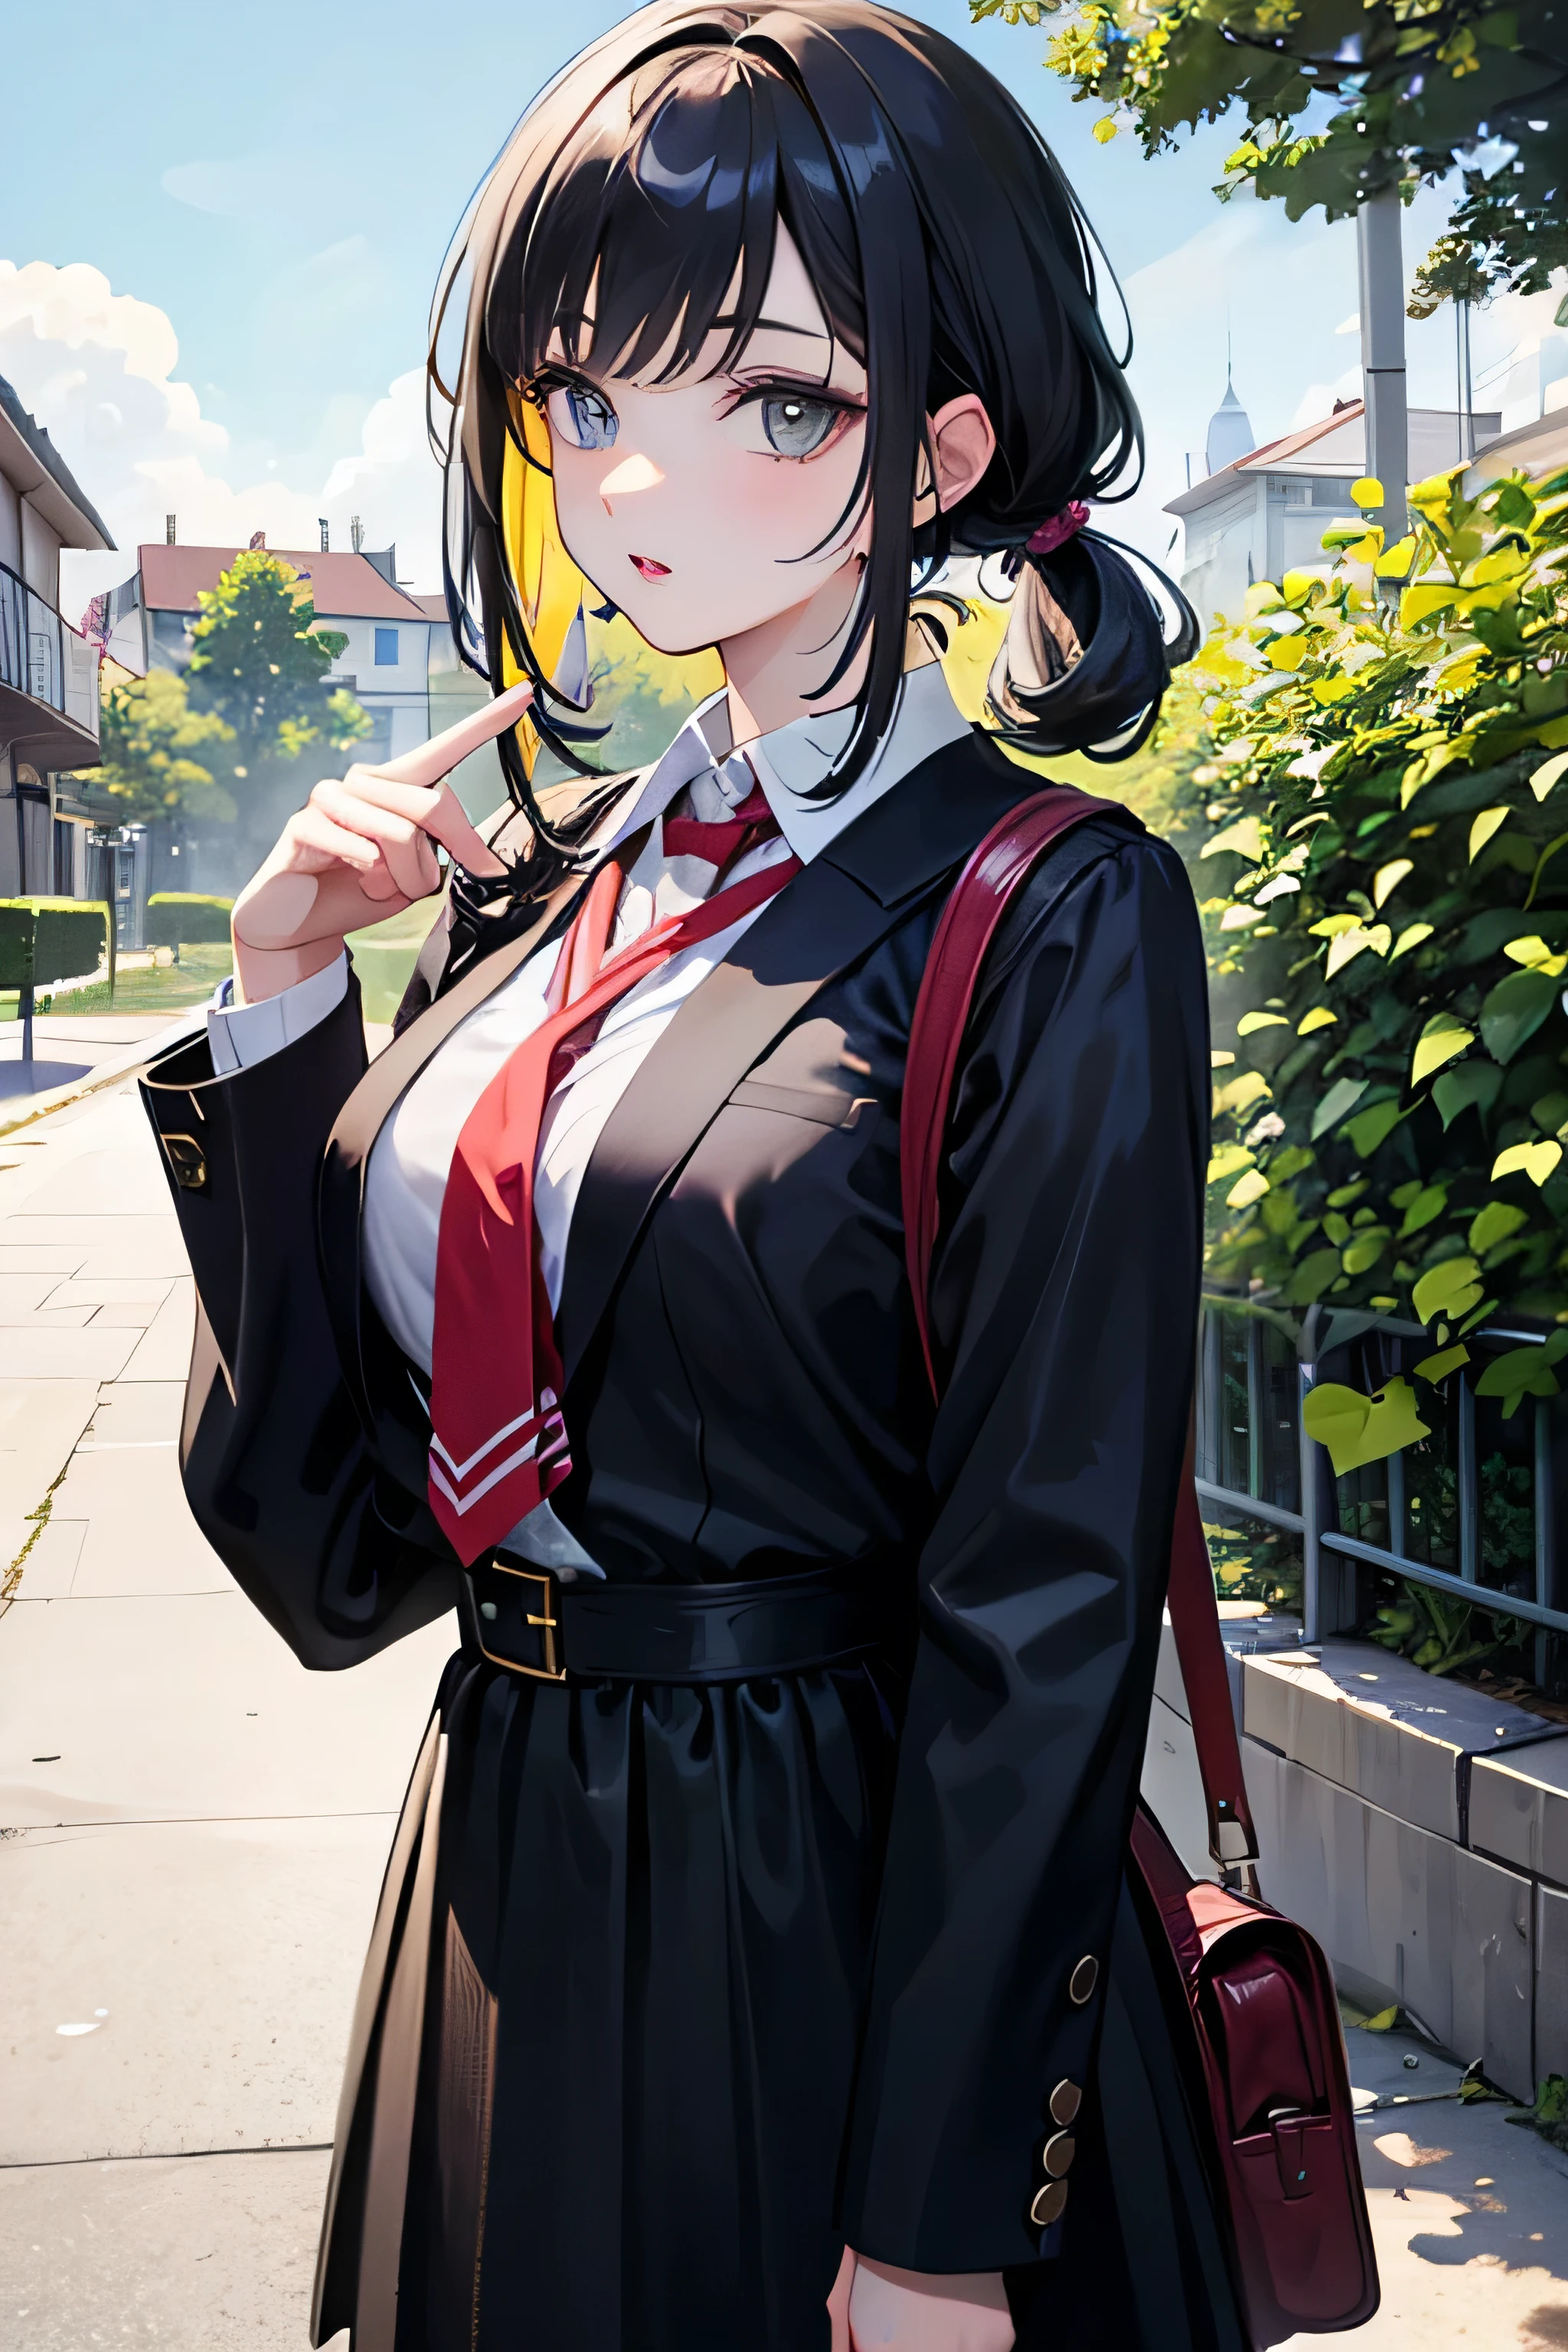 (best quality,4k,highres,masterpiece:1.2),ultra-detailed,realistic,plazos_hiplazosx style,lively and colorful artwork:1.1,portrait,beautiful detailed eyes,beautiful detailed lips,extremely detailed eyes and face,long eyelashes,girl standing,two pigtails,,school bag,car,autorying bag,house,coloful surroundings,lush garden,clear blue sky,vibrant colors,soft and natural lighting